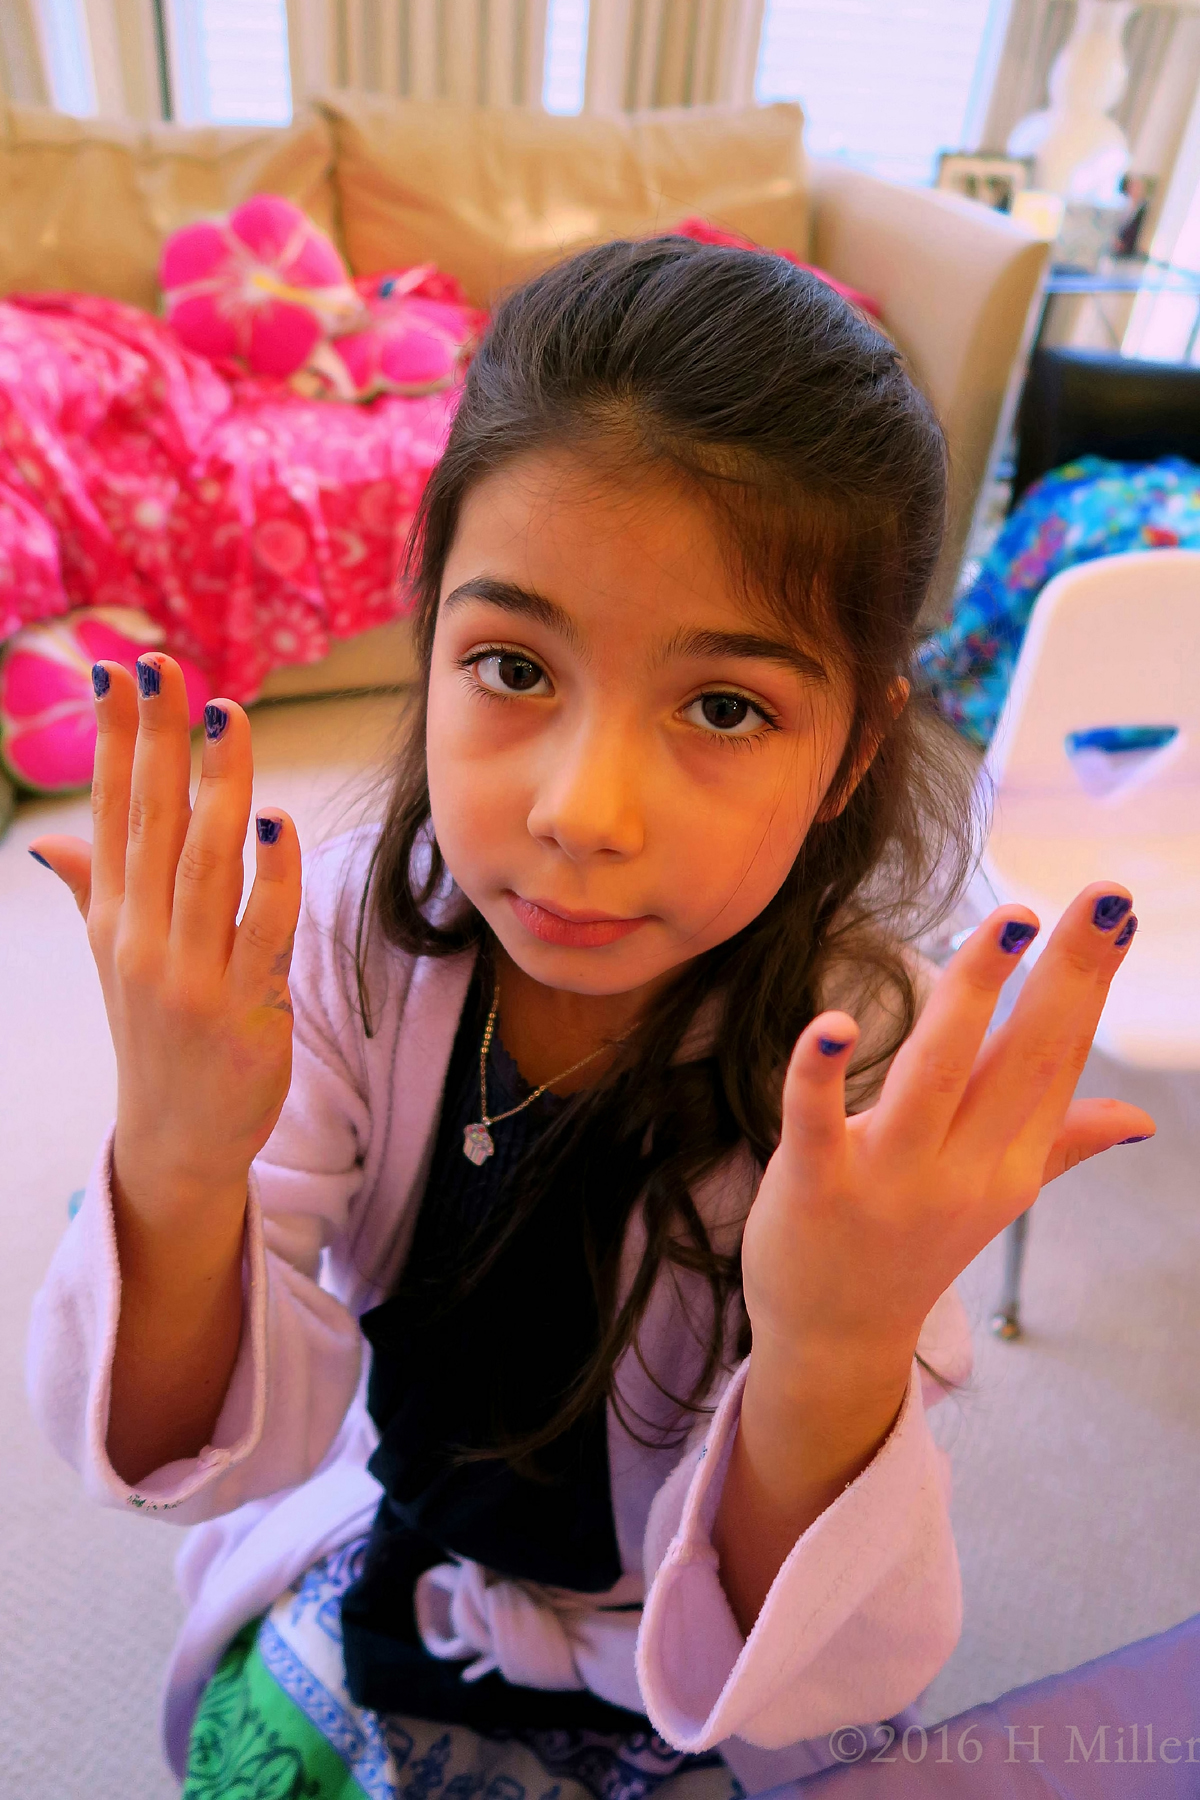 Blue Is Her Favorite Color For A Kids Manicure! 